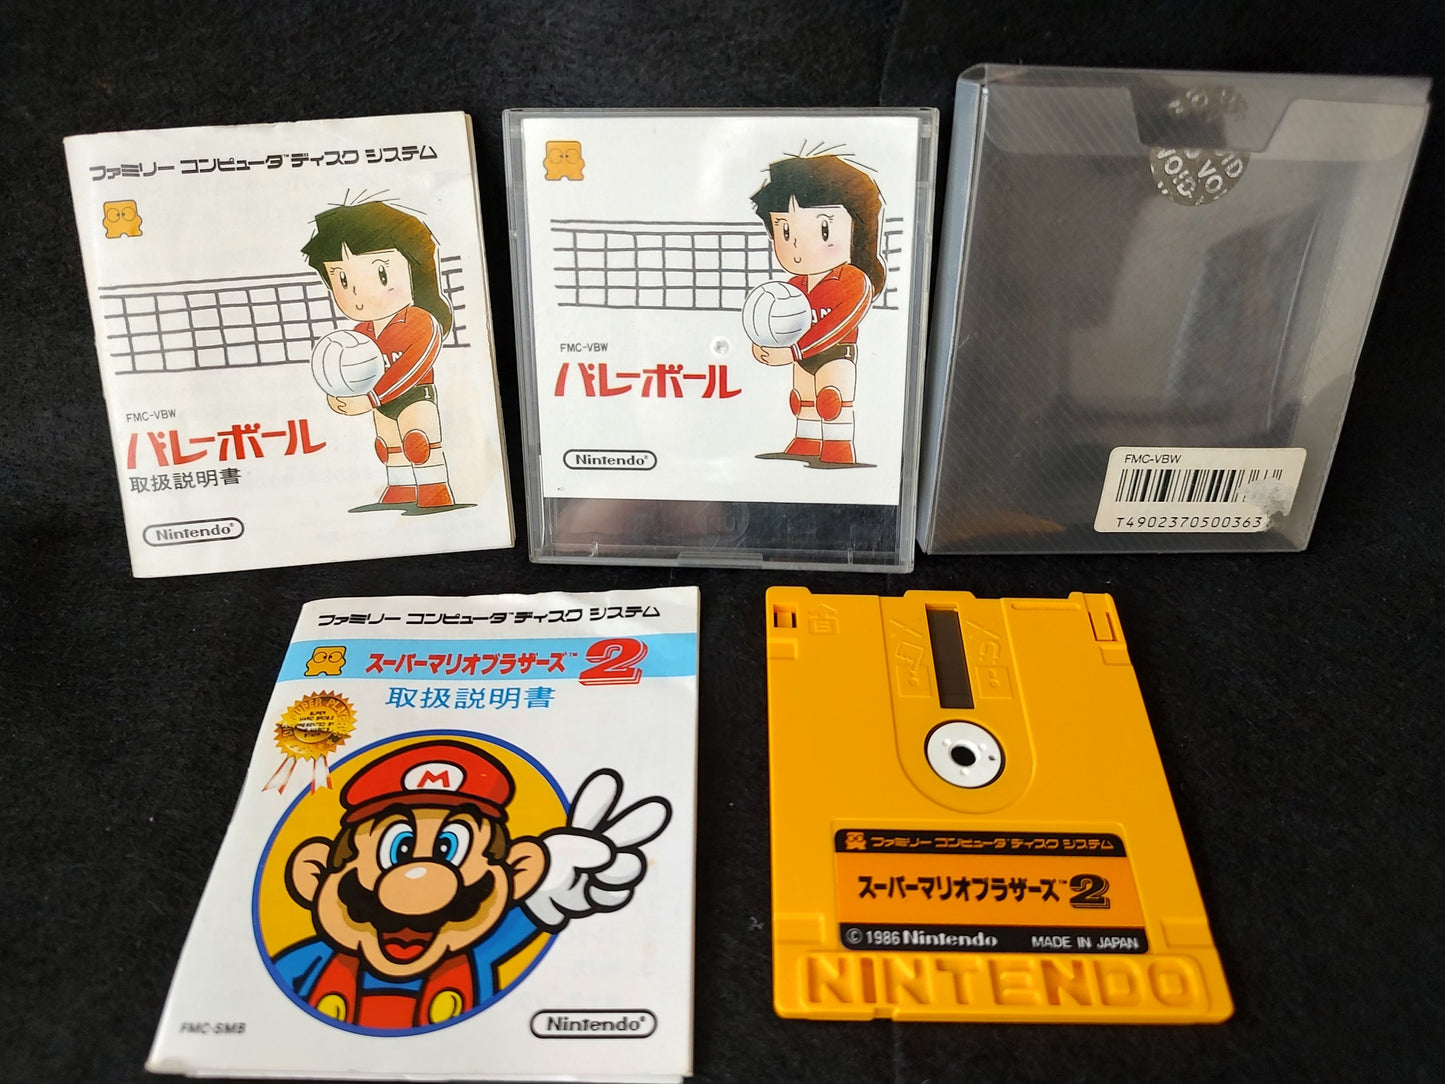 Volley ball / Super Mario Brothers 2 FAMICOM DISK SYSTEM/Disk and 